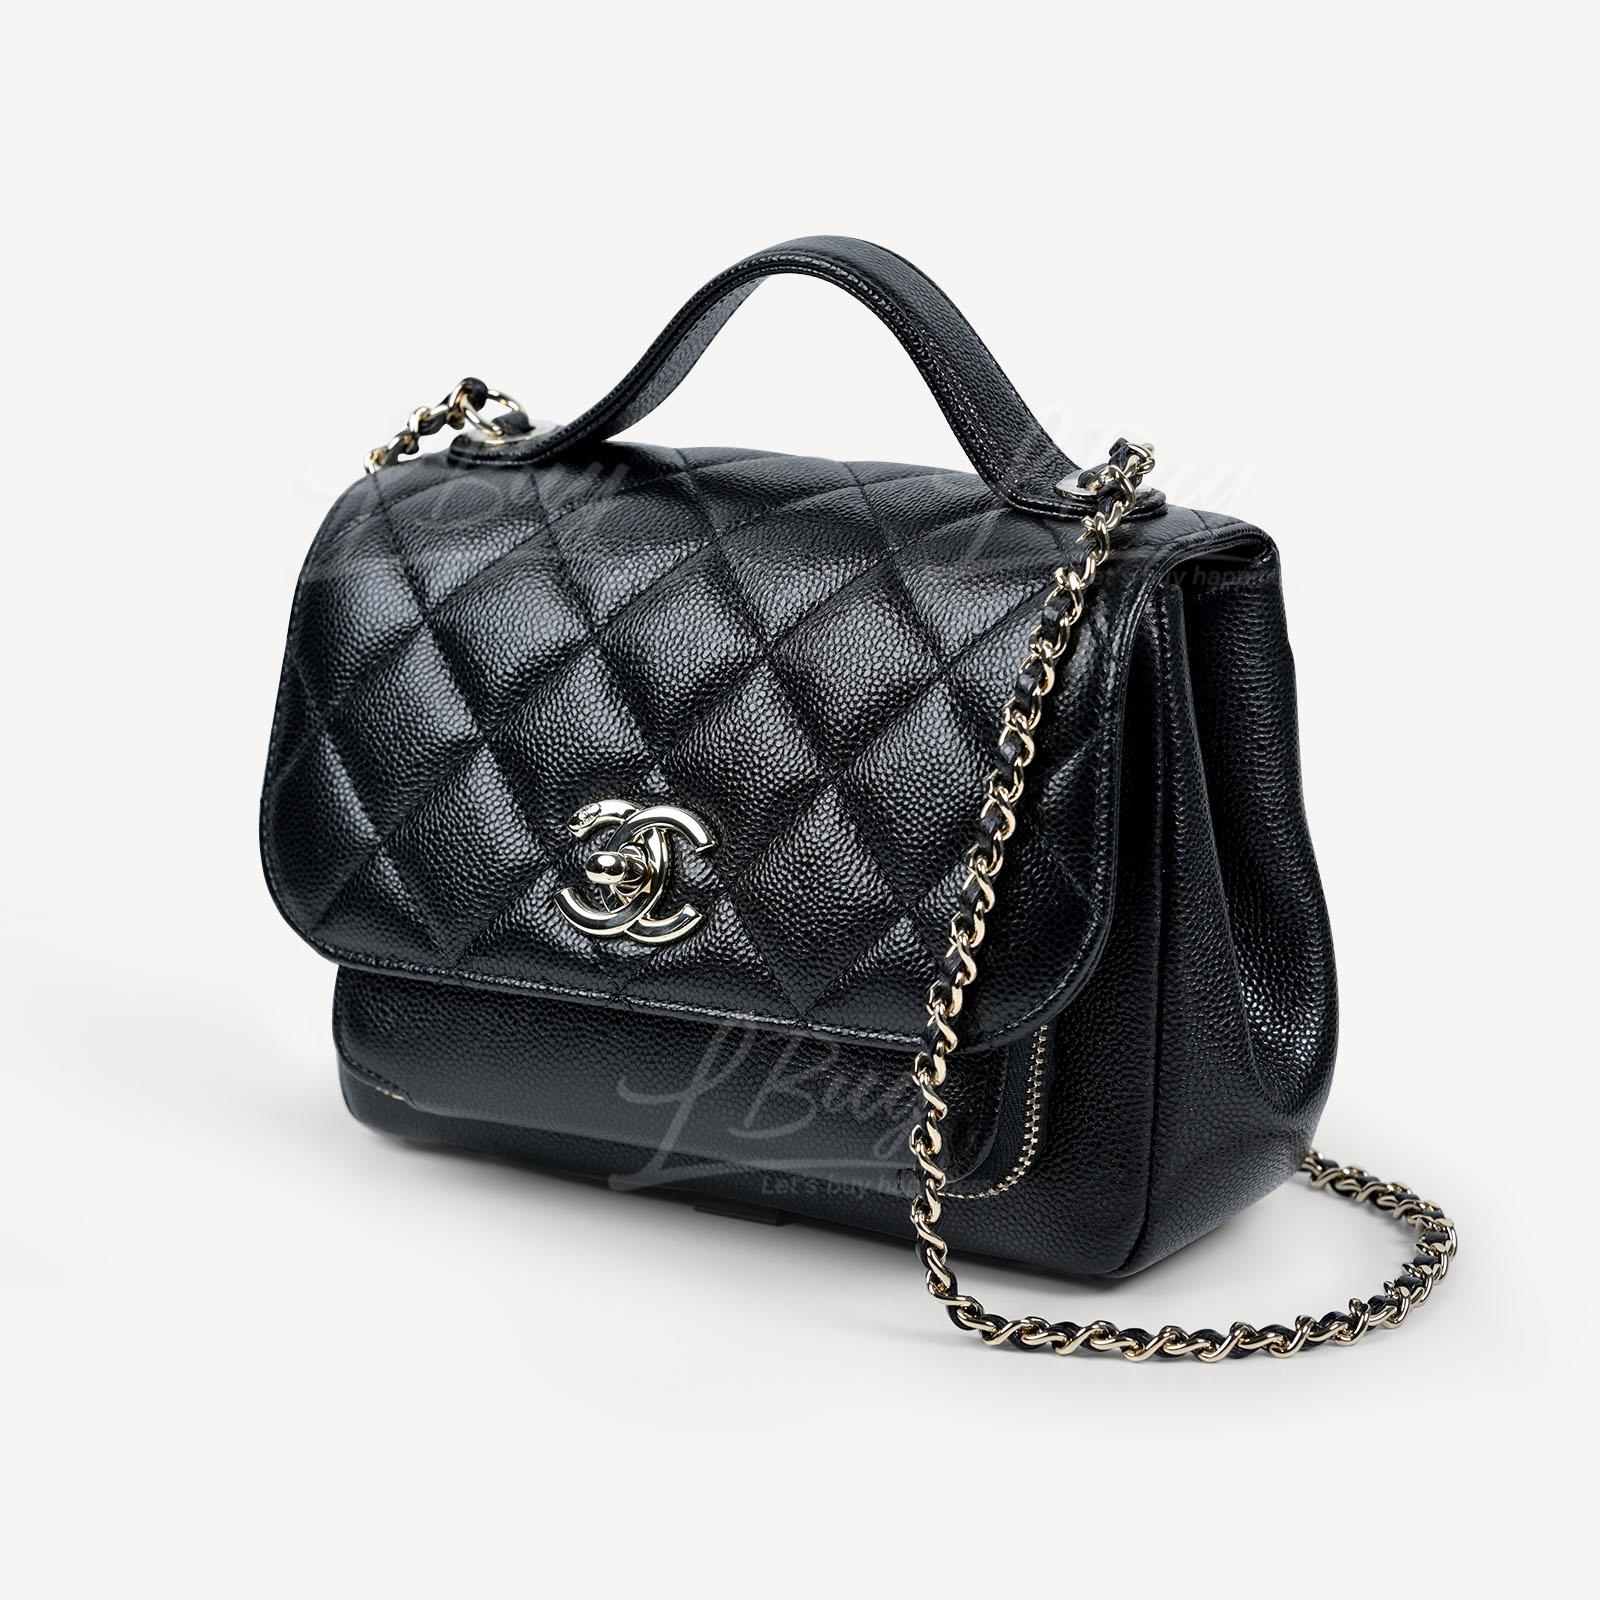 CHANEL-Chanel Affinity Small Size Black Flap Bag